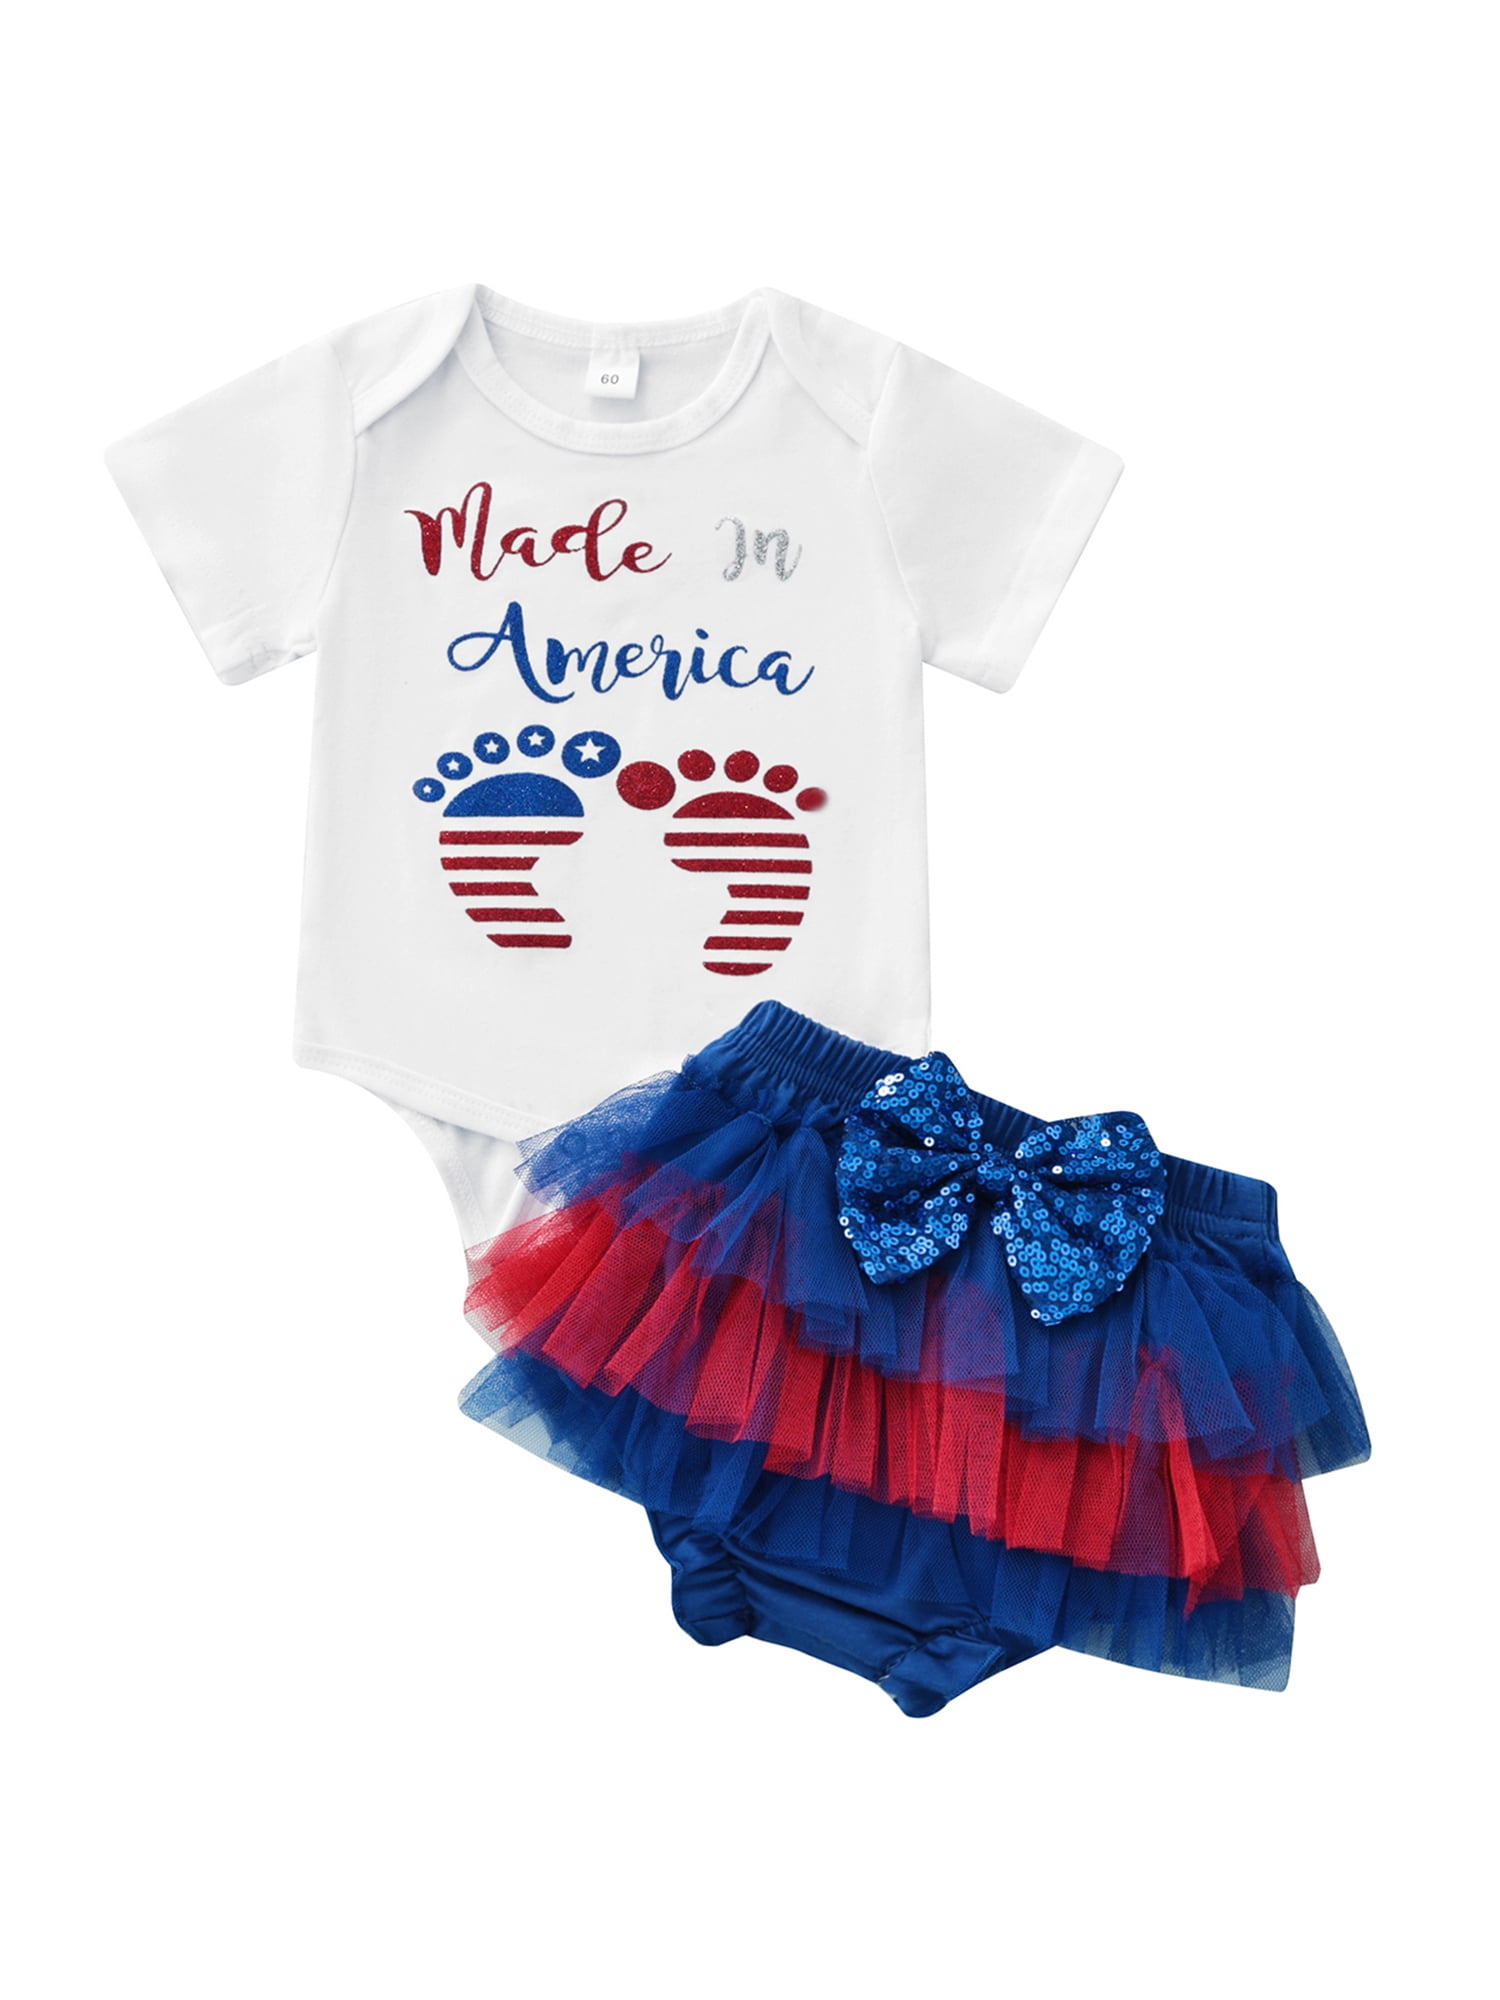 Sailor Girl Costume 2 Pc Red White & Blue Patriotic Skirt With Suspenders & Top 